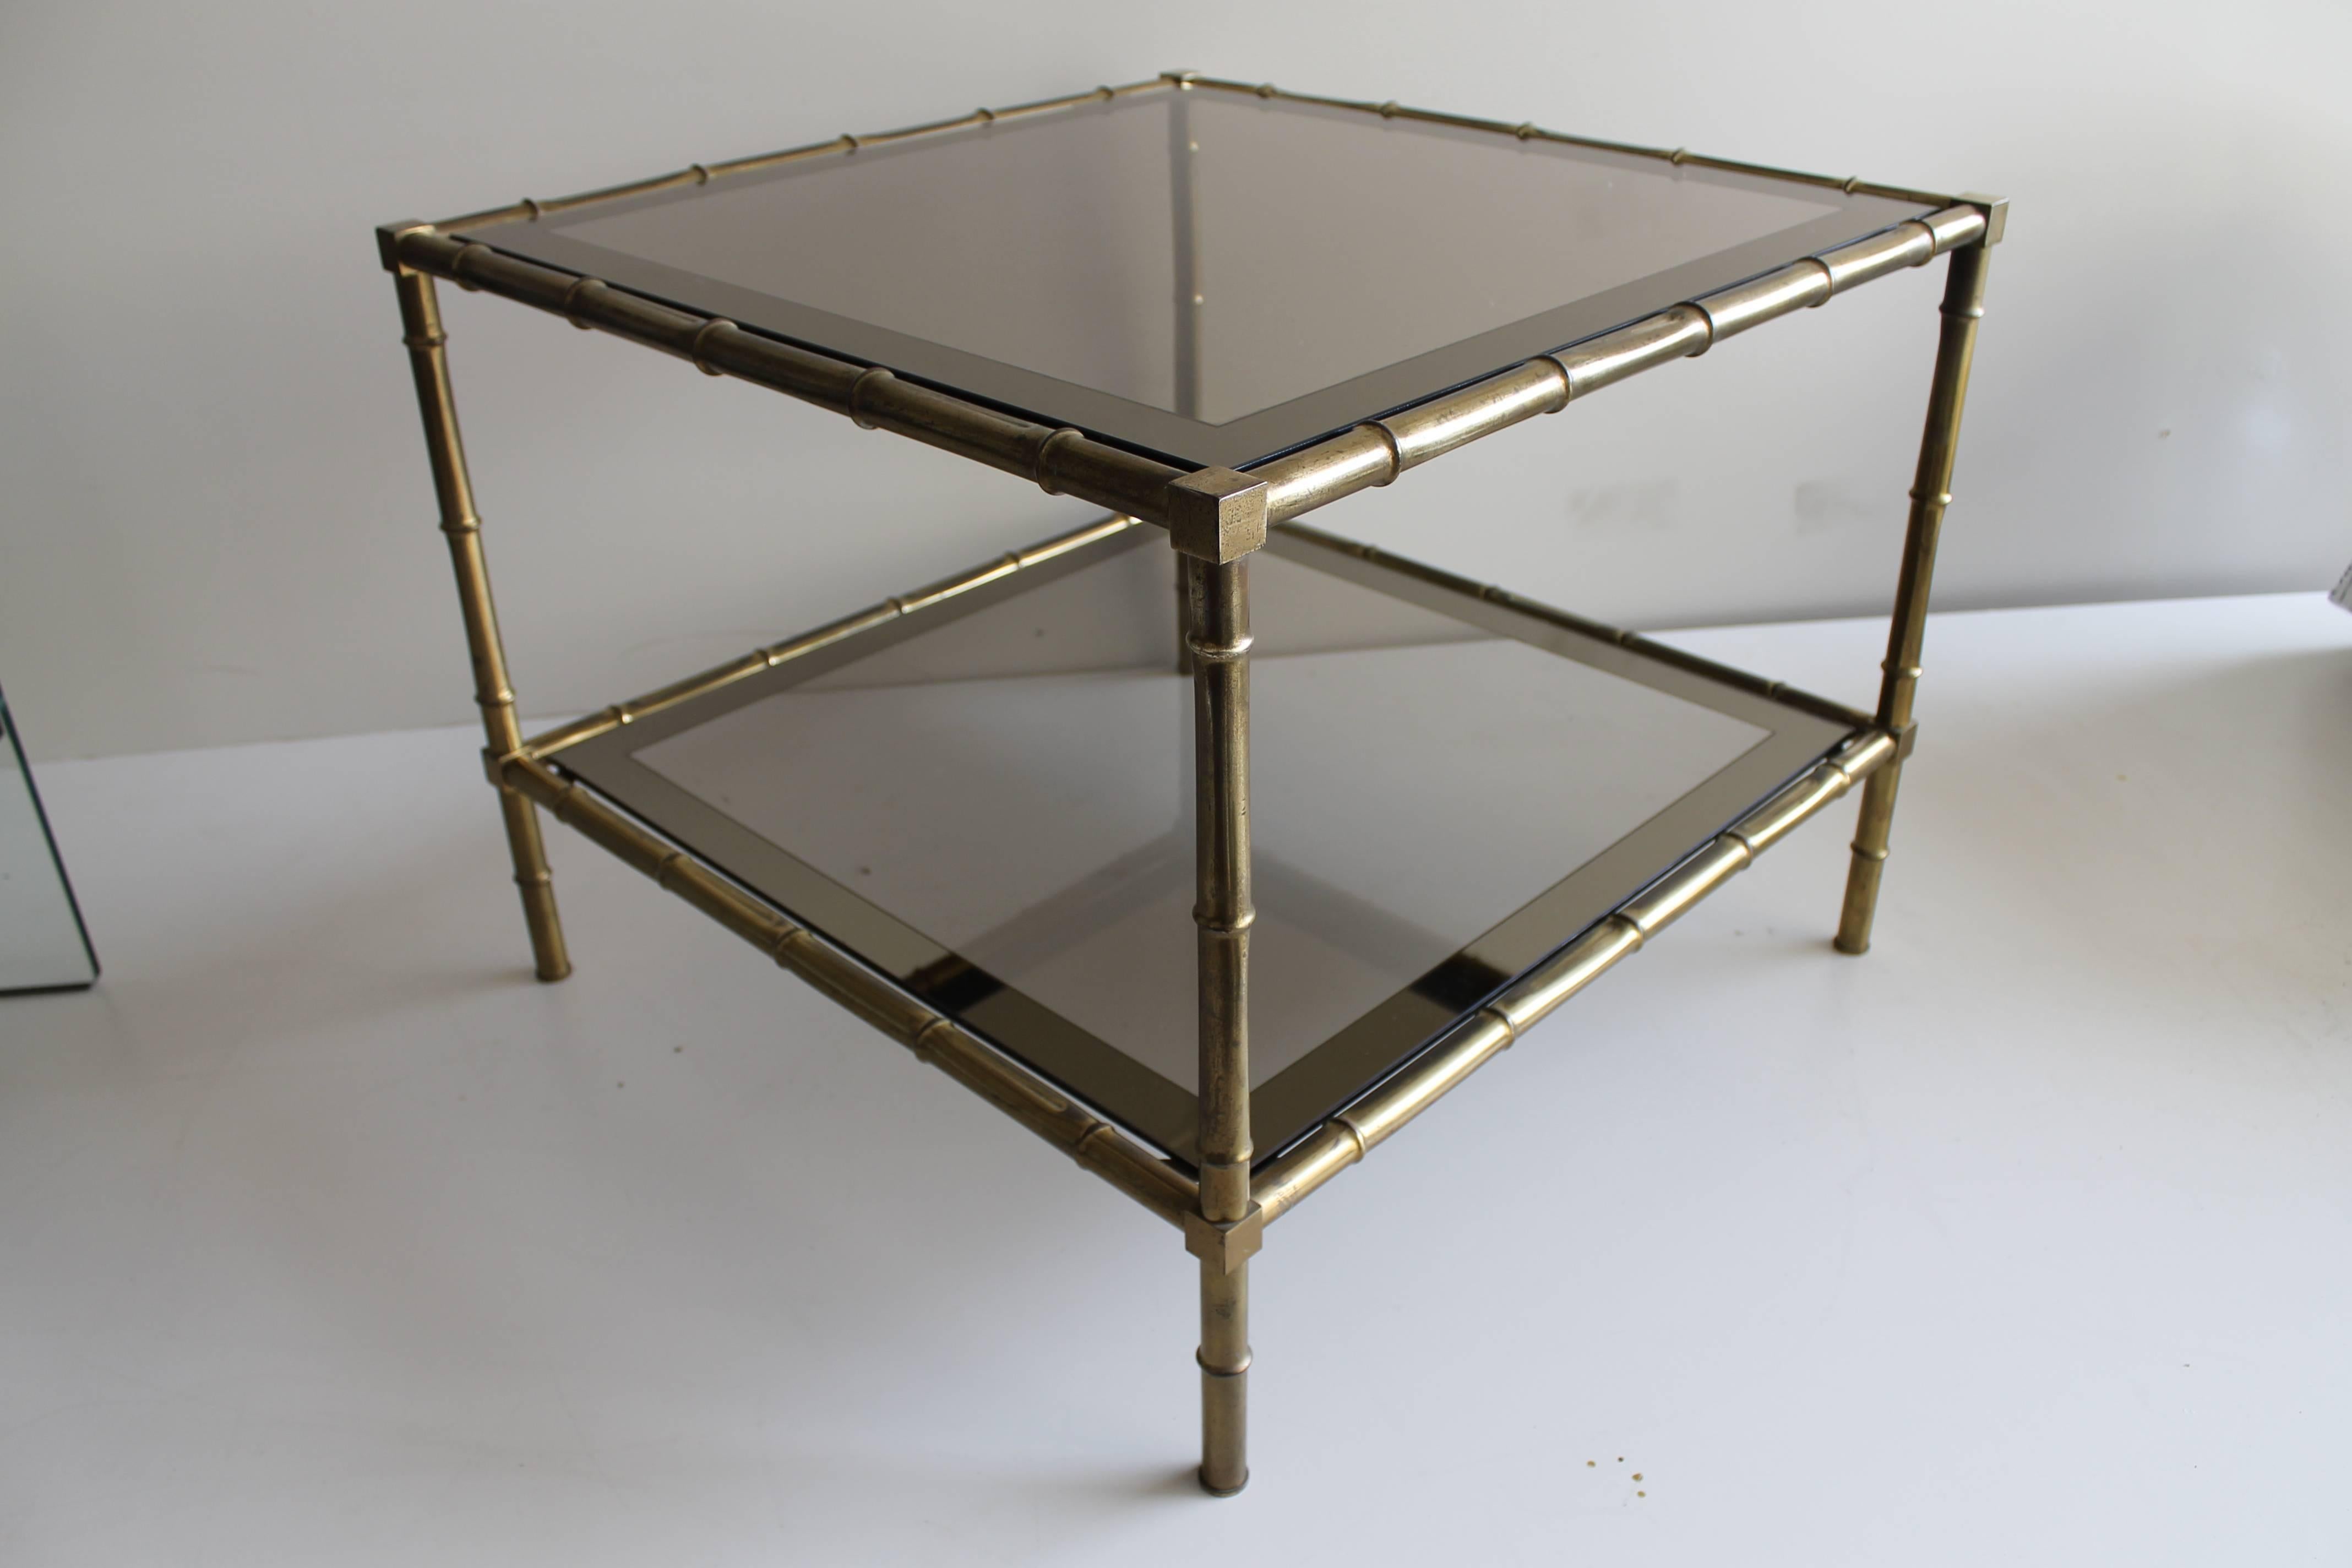 Italian modern squared coffee table with black smocked glass double top and faux bamboo gold brass legs. The top has a mirror frame on both levels. It is dated circa 1975.